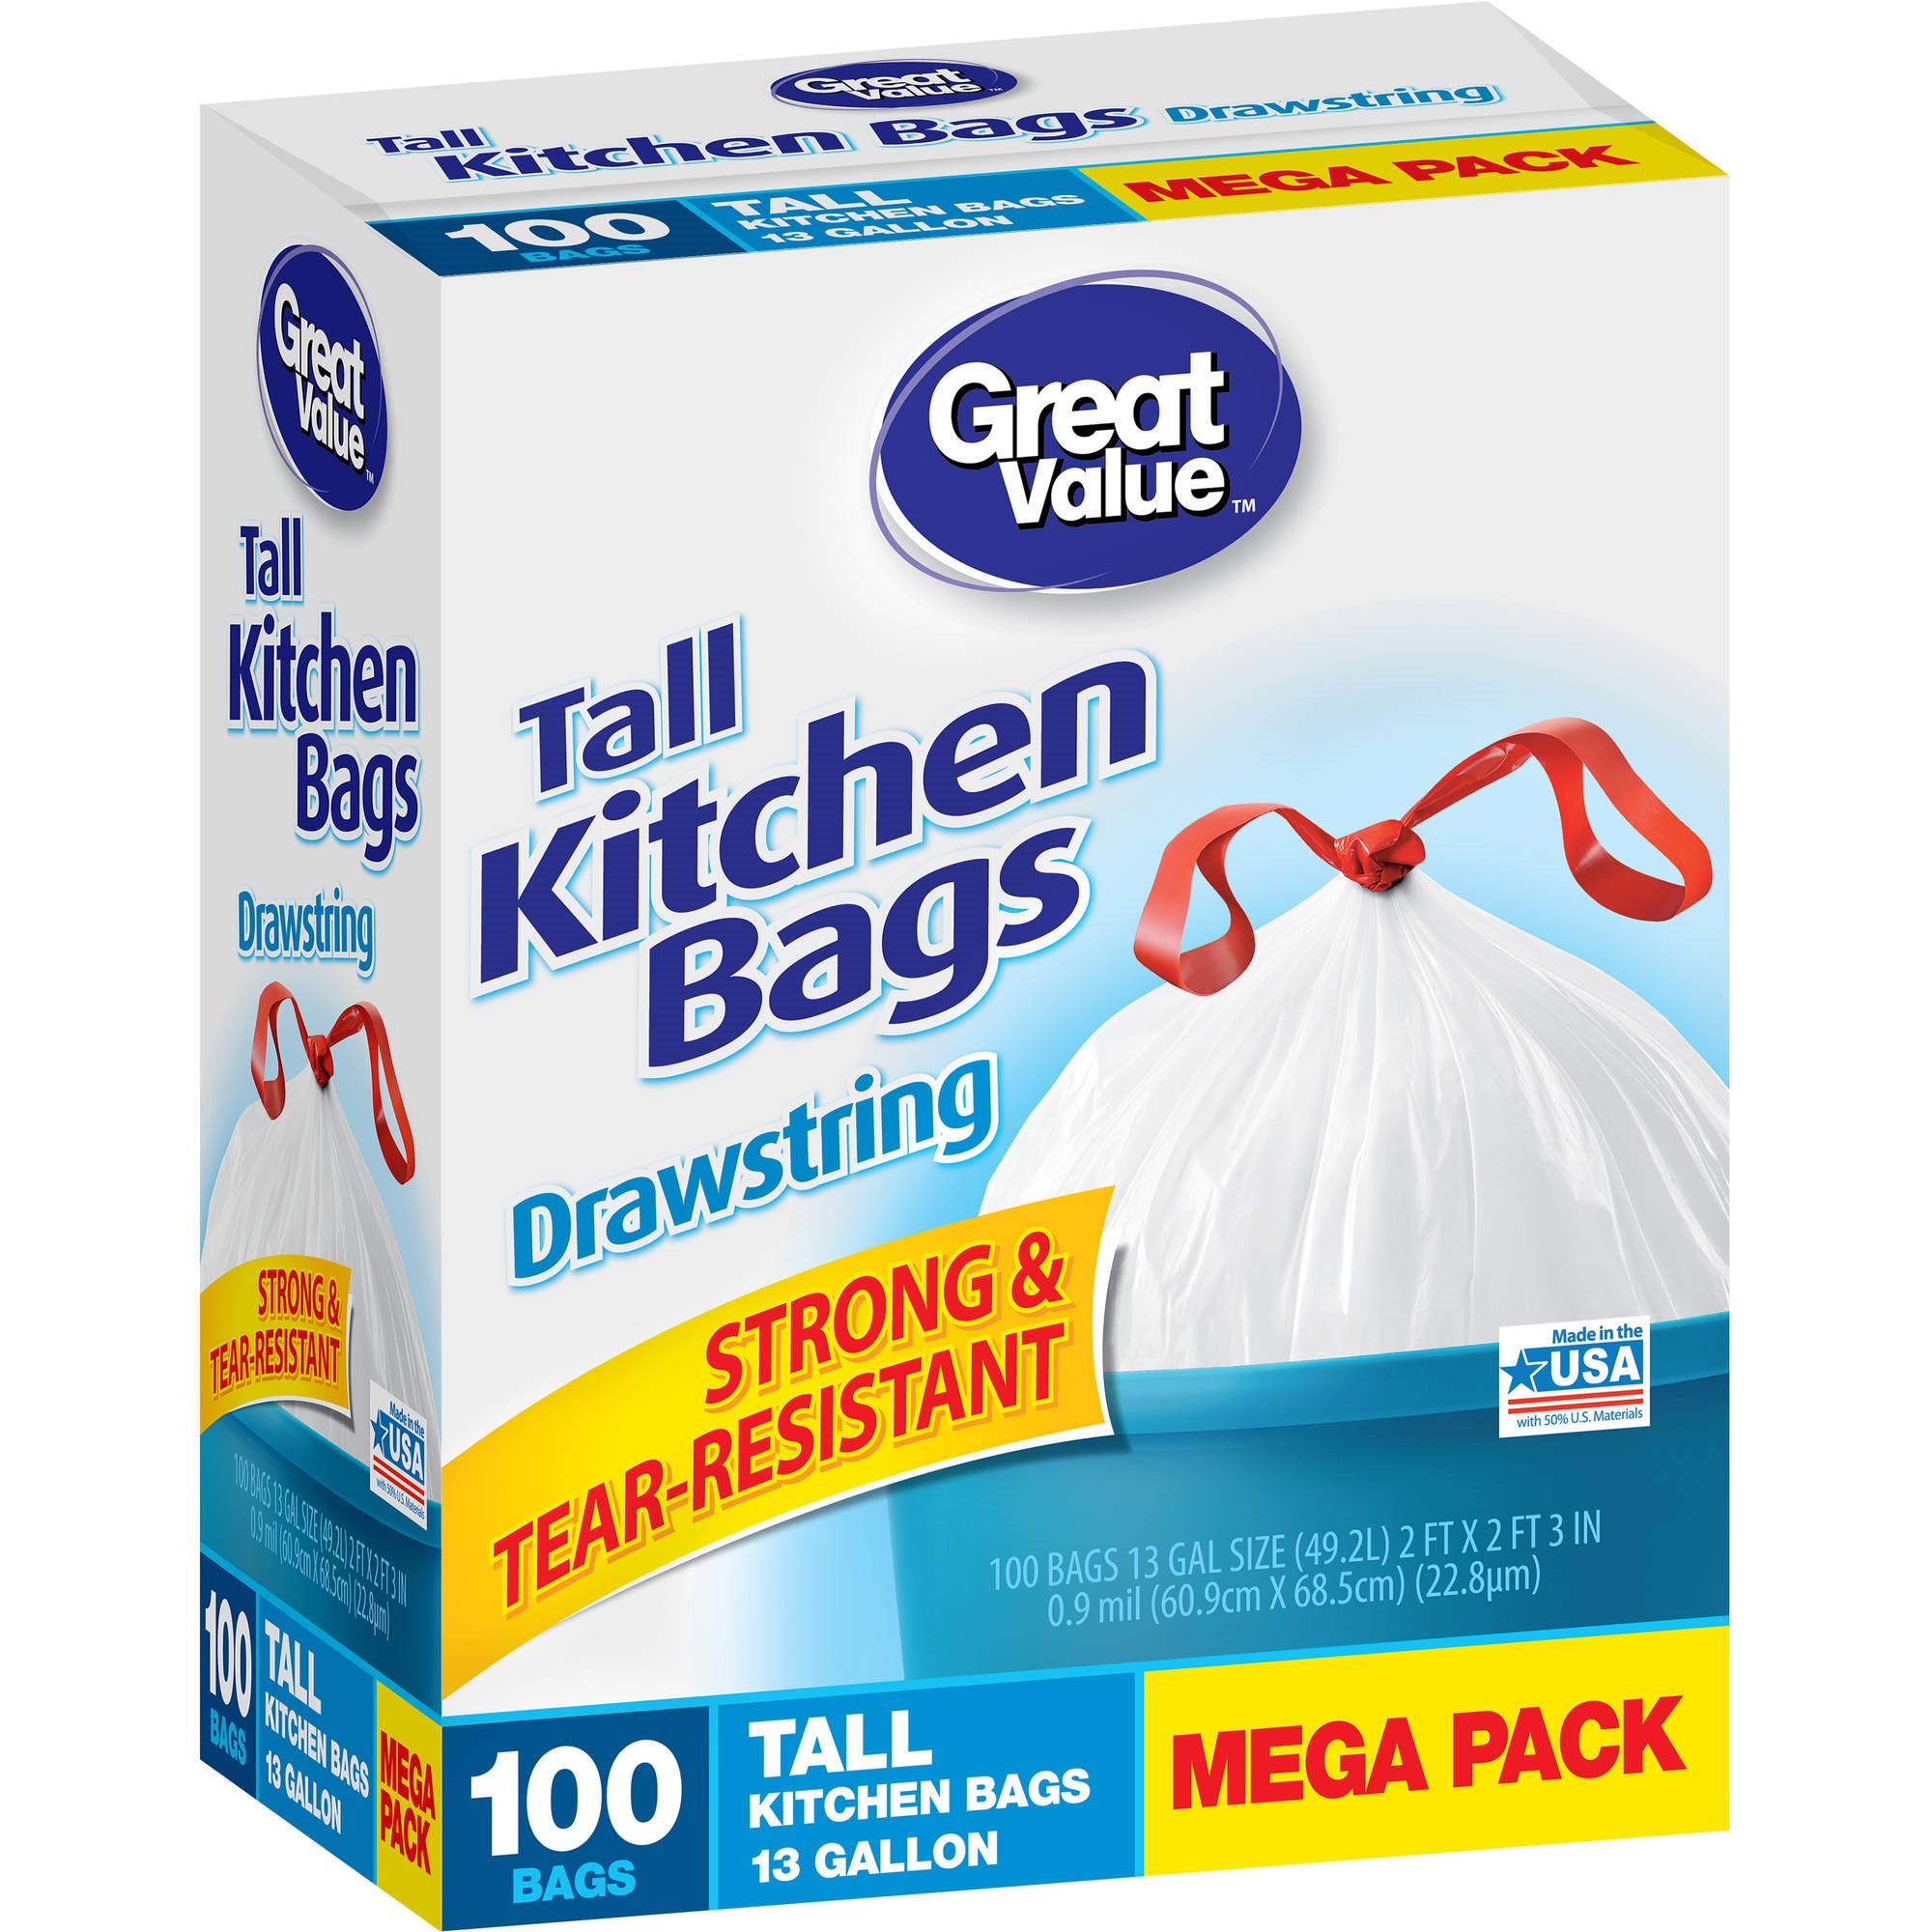 Great Value Tall Drawstring Kitchen Bags, 13 Gallon, White, 100 Ct - image 2 of 2